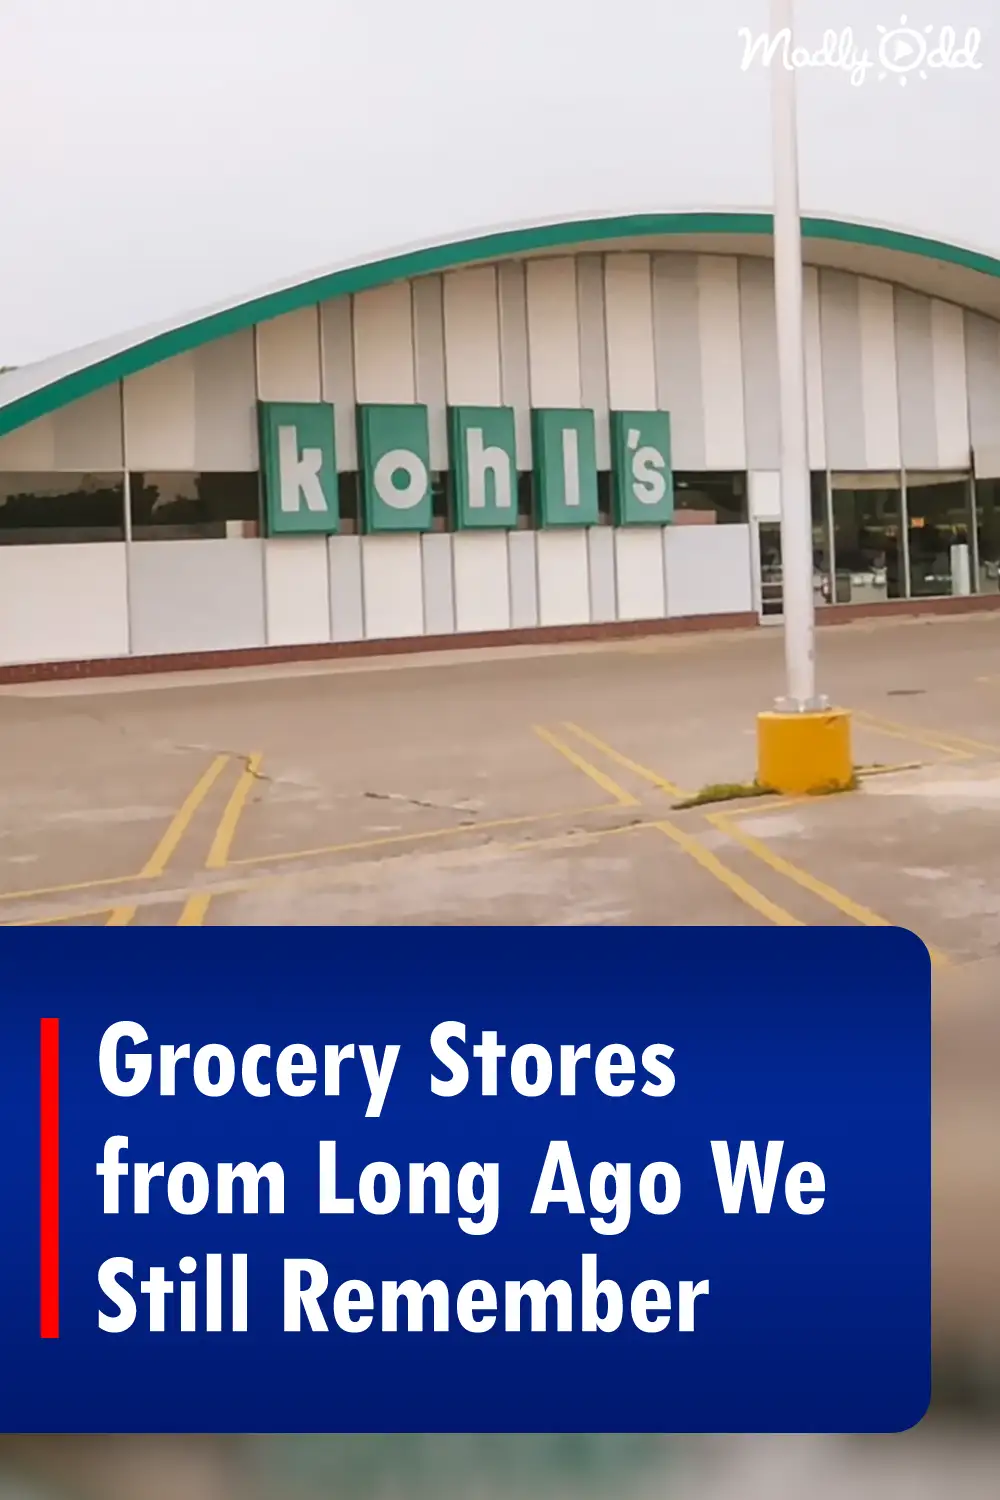 Grocery Stores from Long Ago We Still Remember